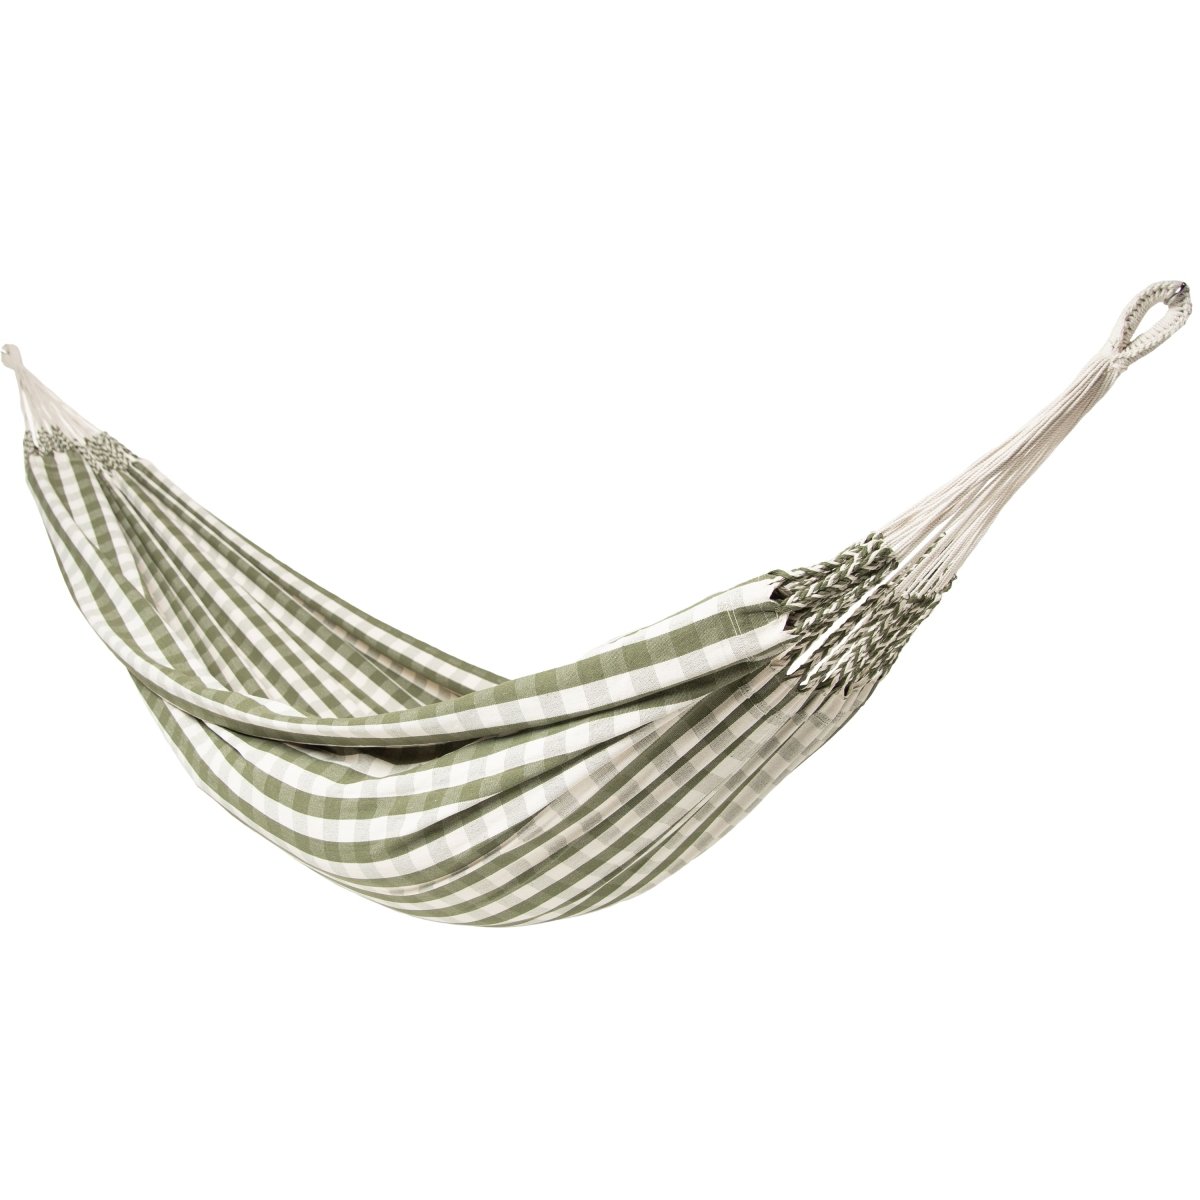 10ft White Universal Steel Hammock Stand &amp; Authentic Double Vichy Hammock in Urban Olive - Outdoorium